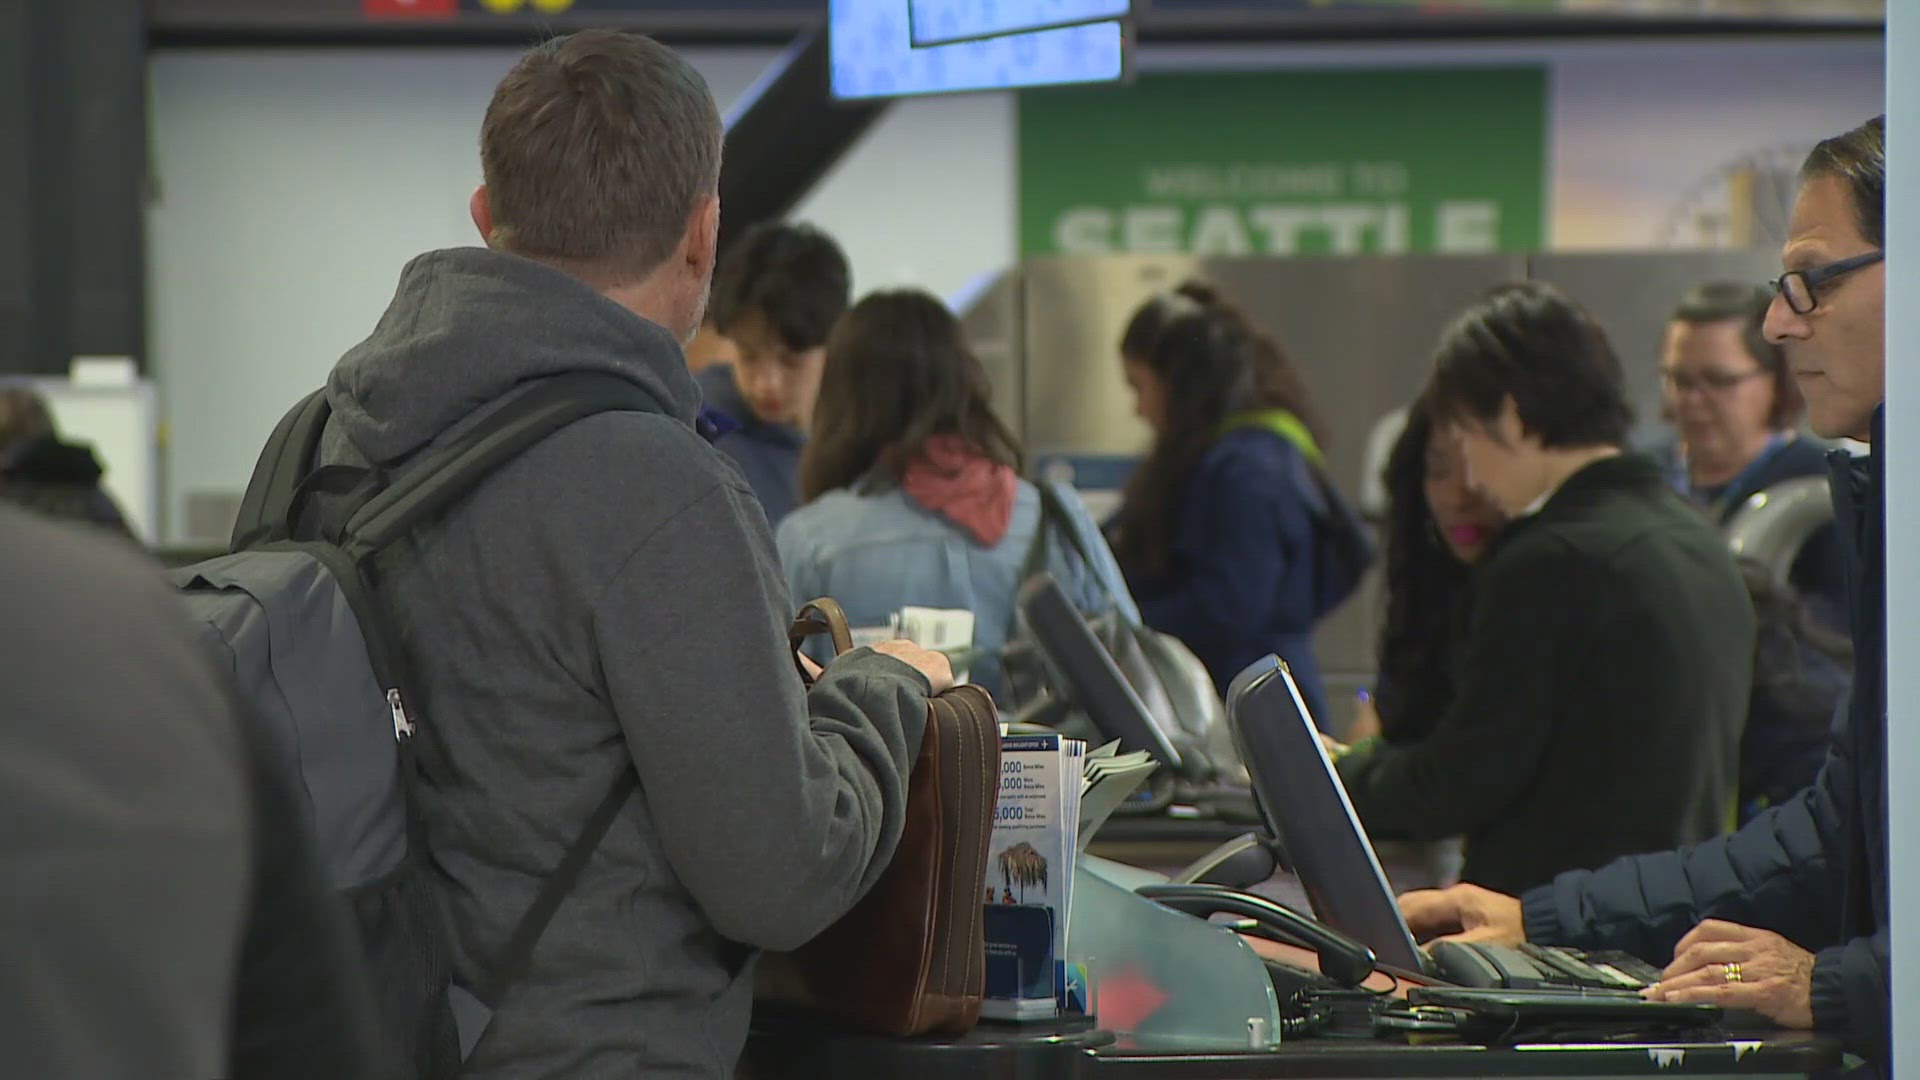 The Port of Seattle said the number of passengers passing through the airport is expected to be at or slightly above 2019 and 11% above 2022 levels.